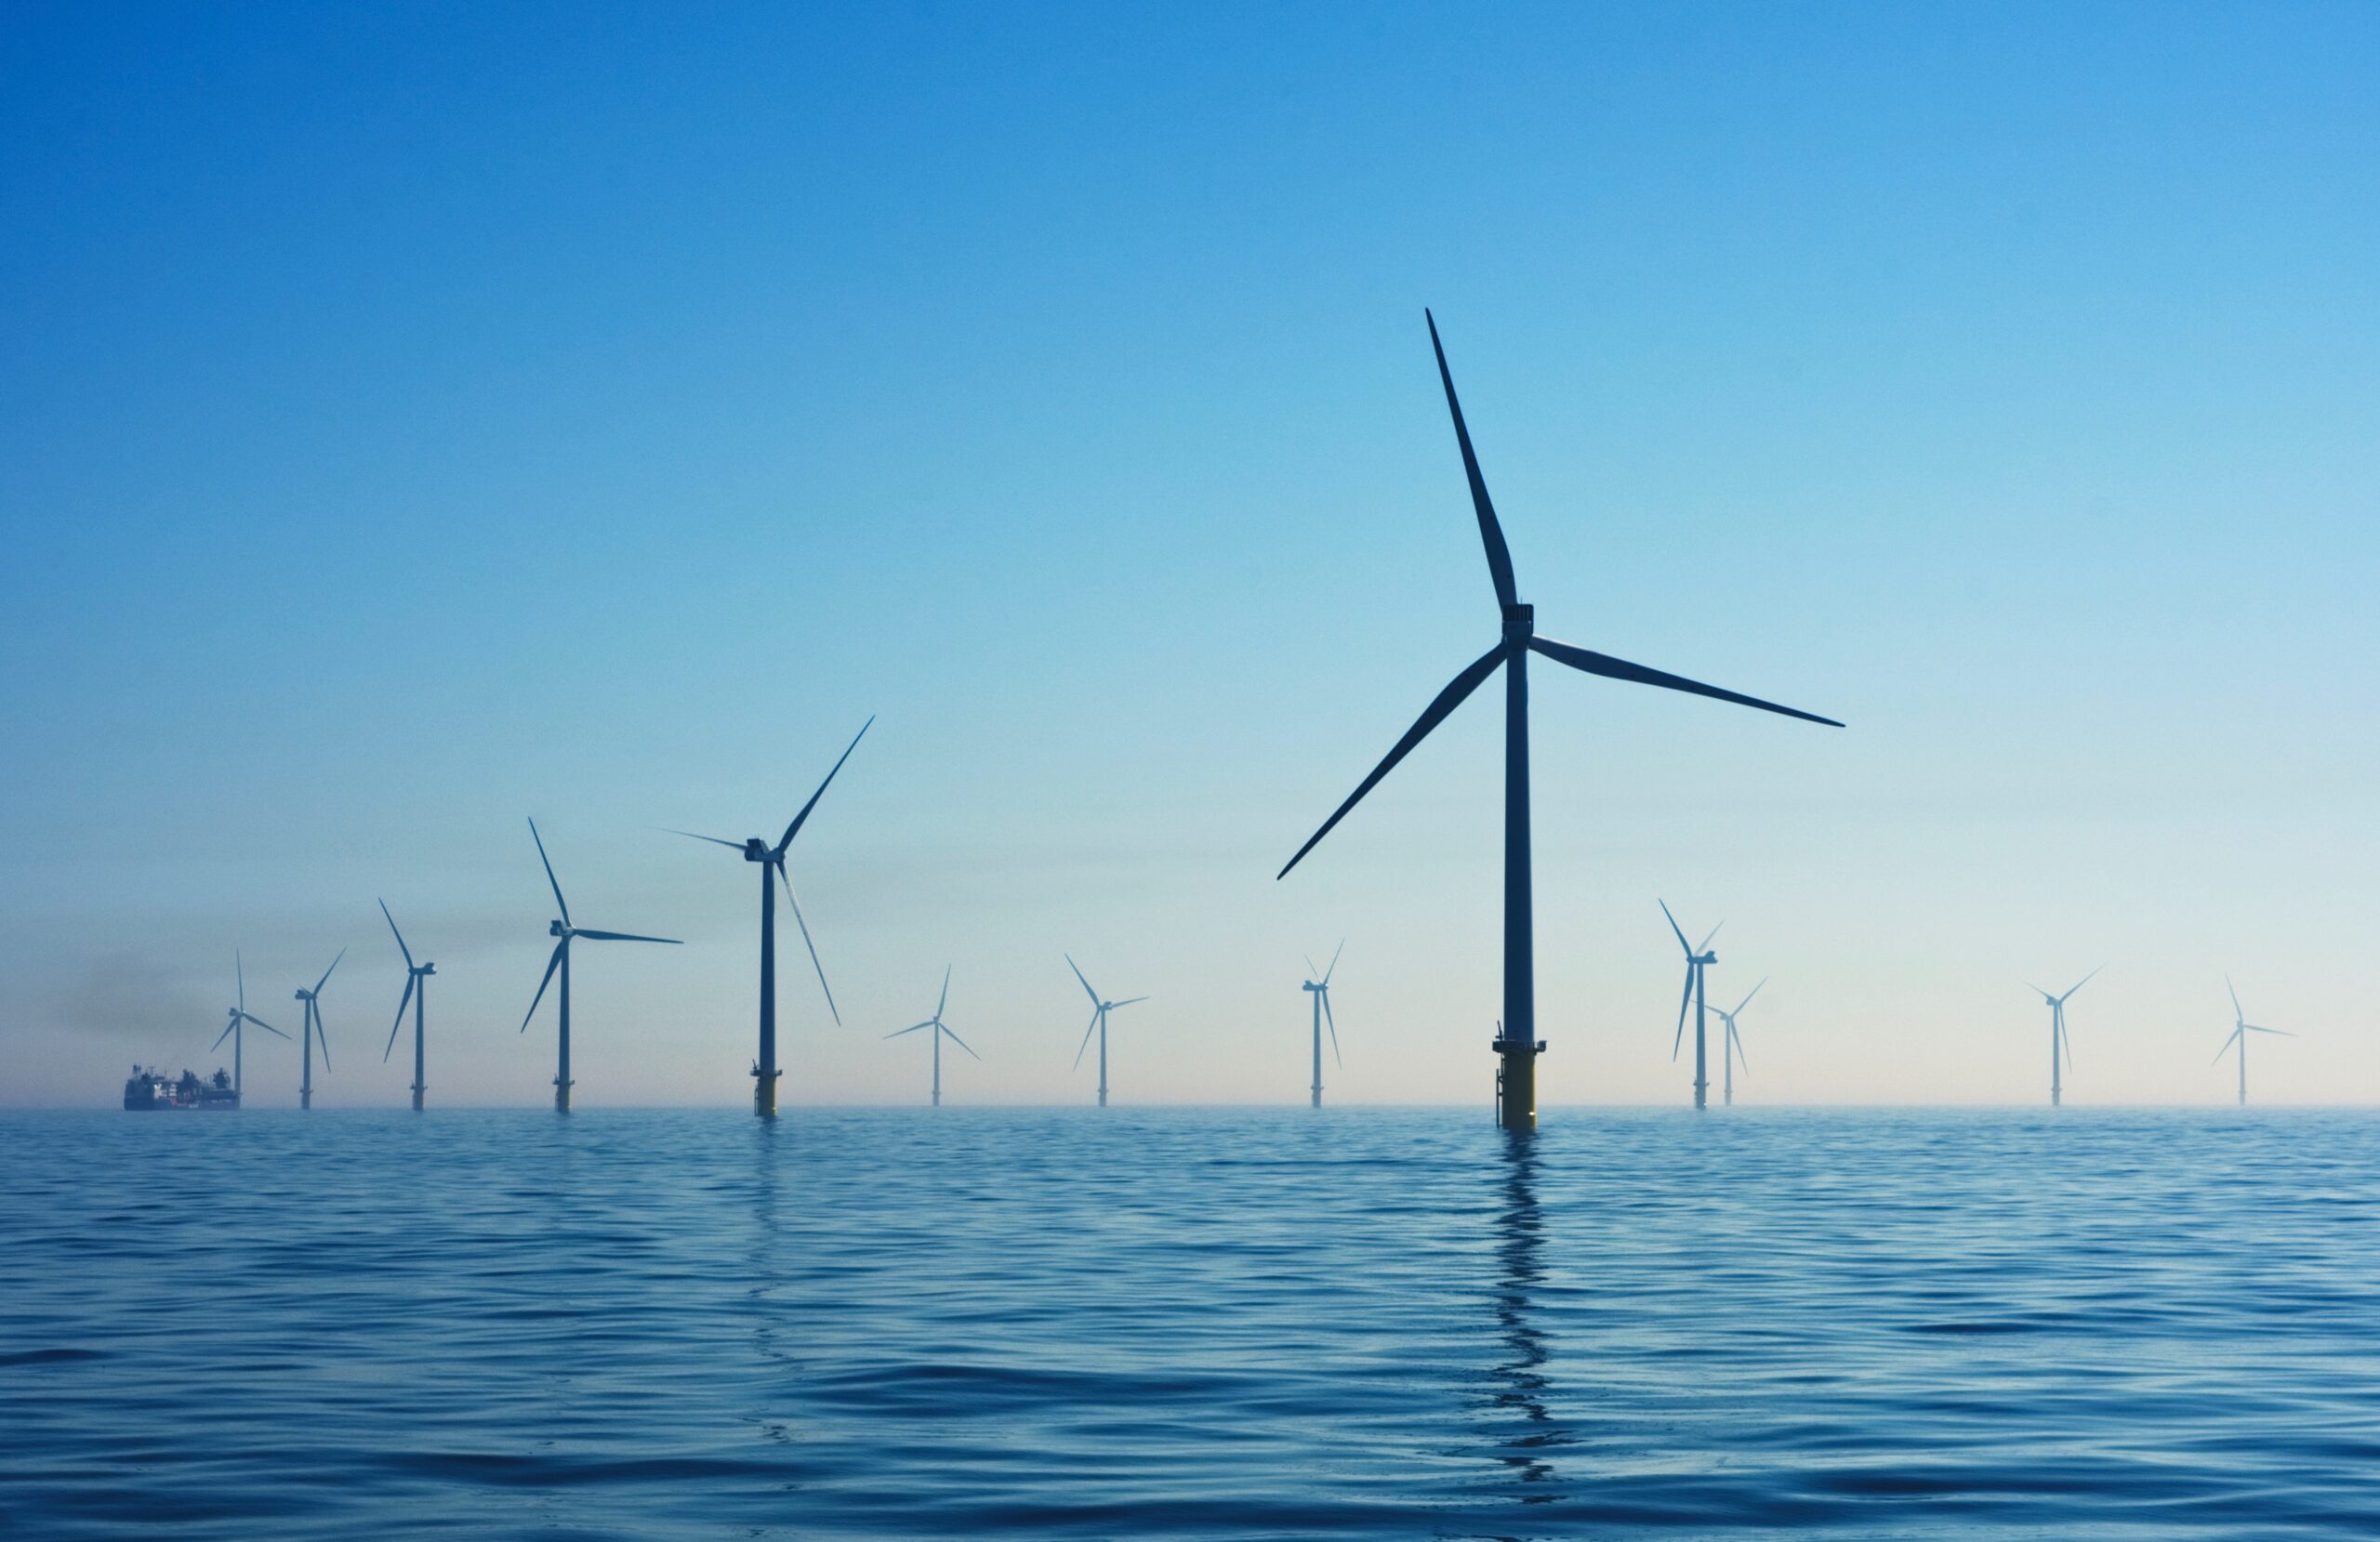 Aspen Tech Policy Hub: Designing a More Equitable Offshore Wind Industry